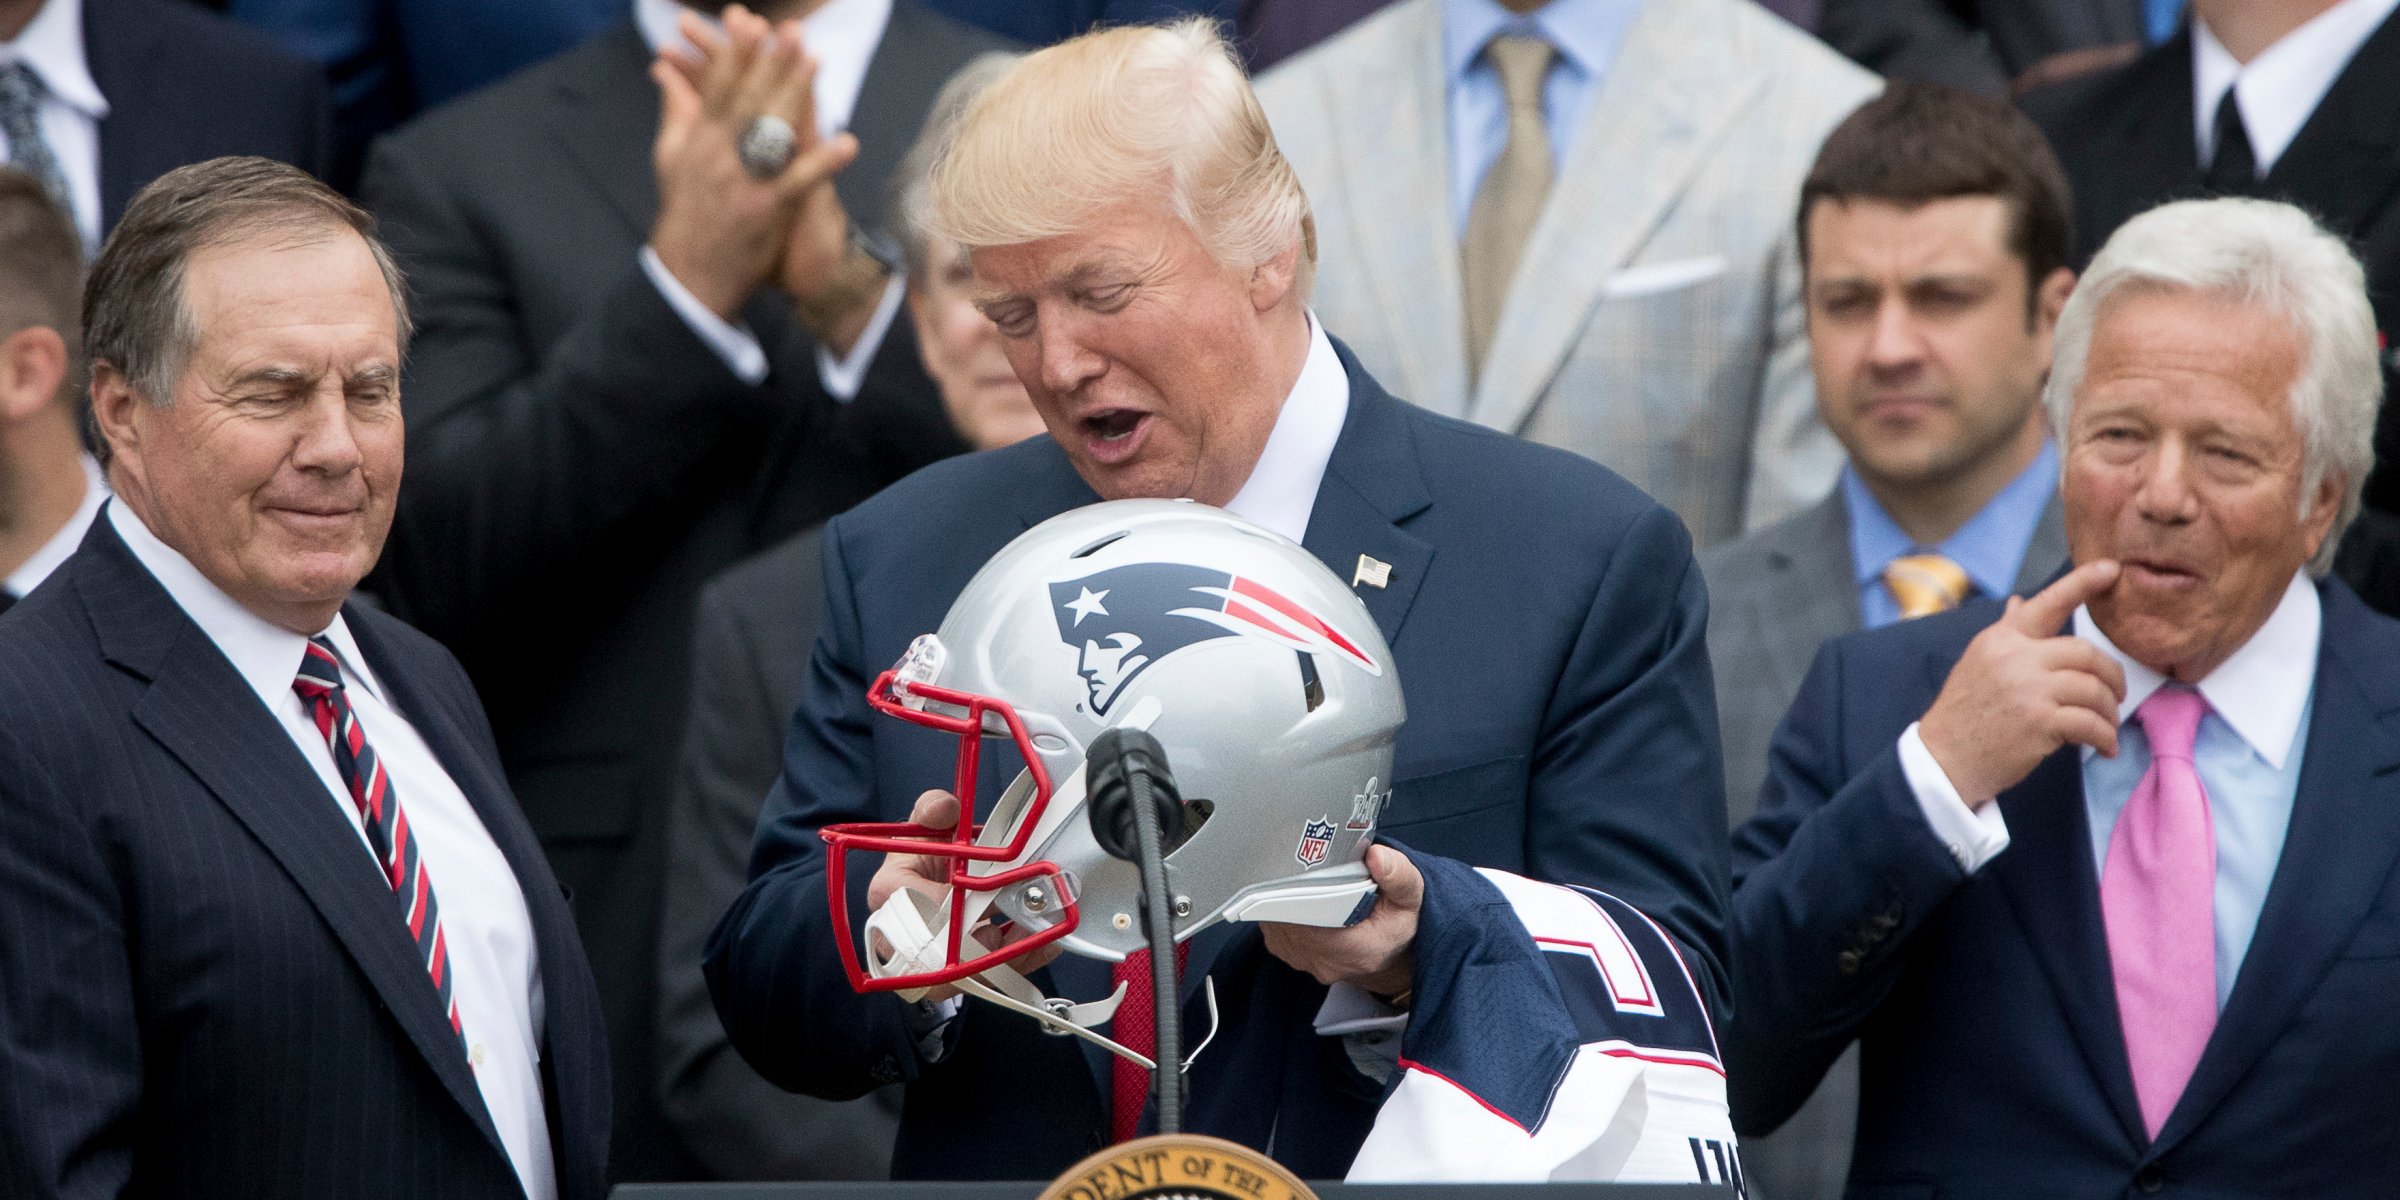 Bovada offers odds on Donald Trump attending NFL game or Colin